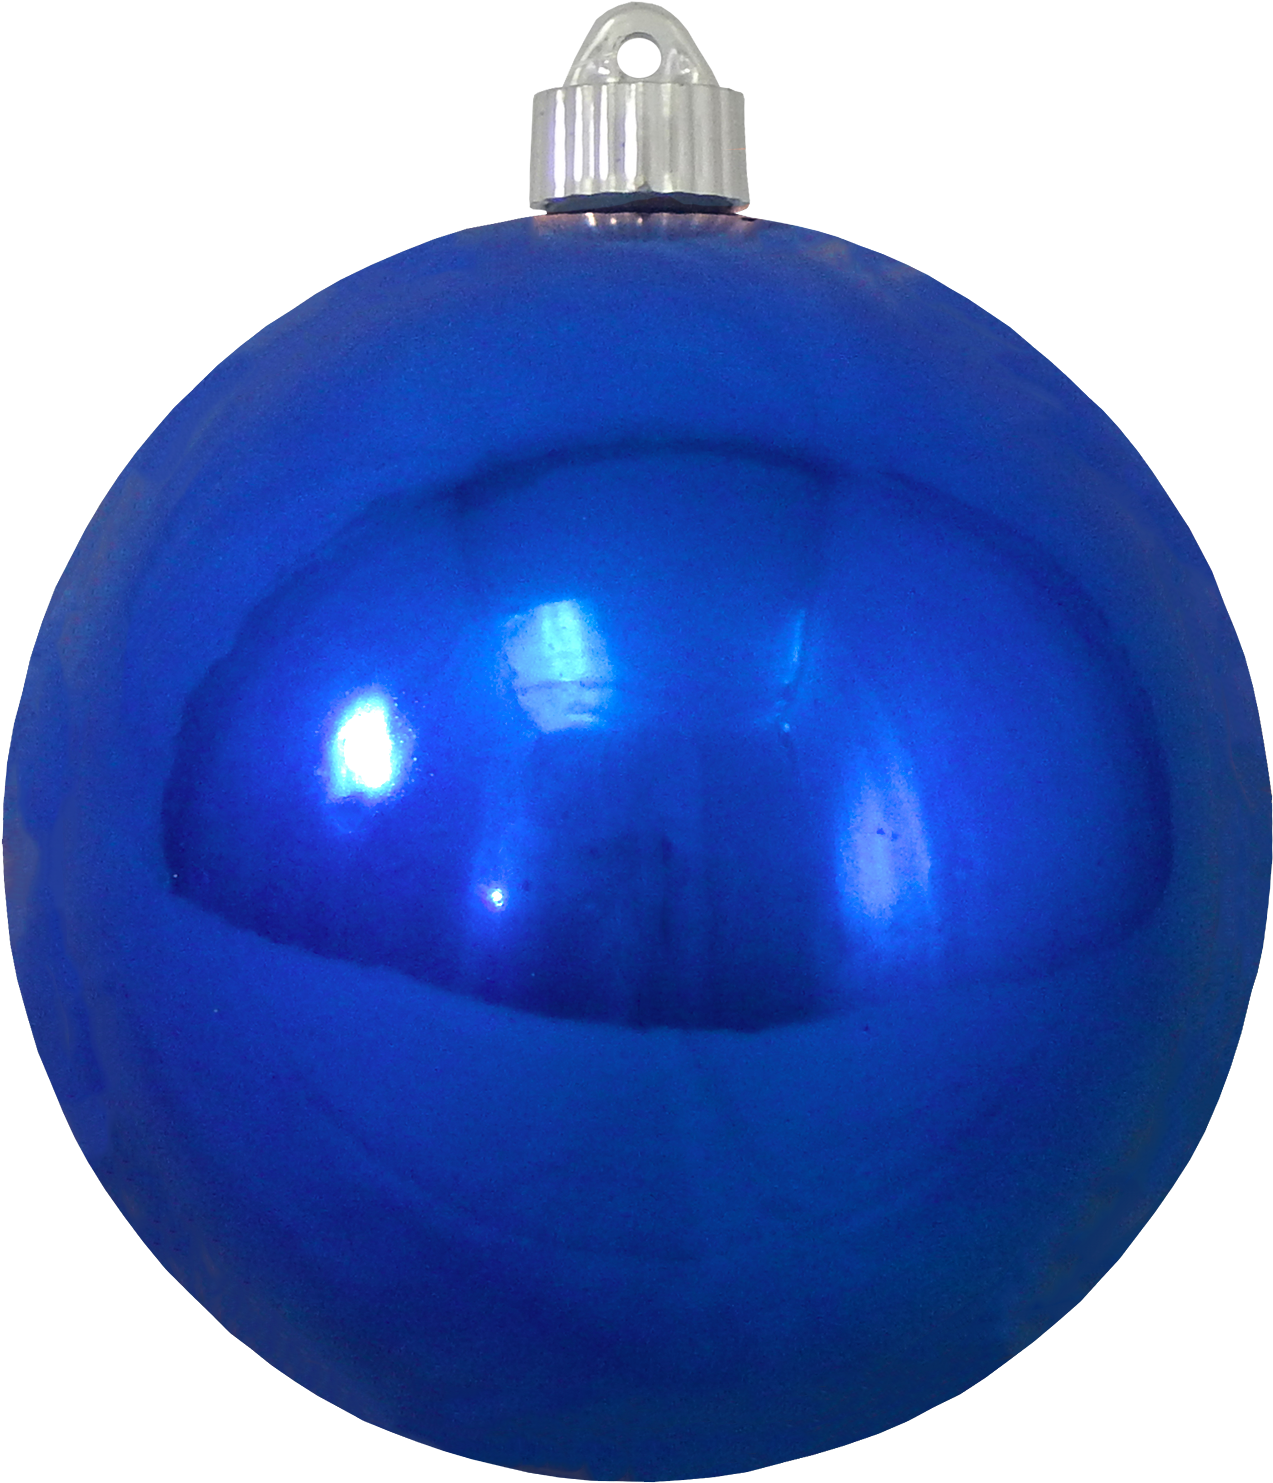 Blue Christmas Download HQ PNG Image